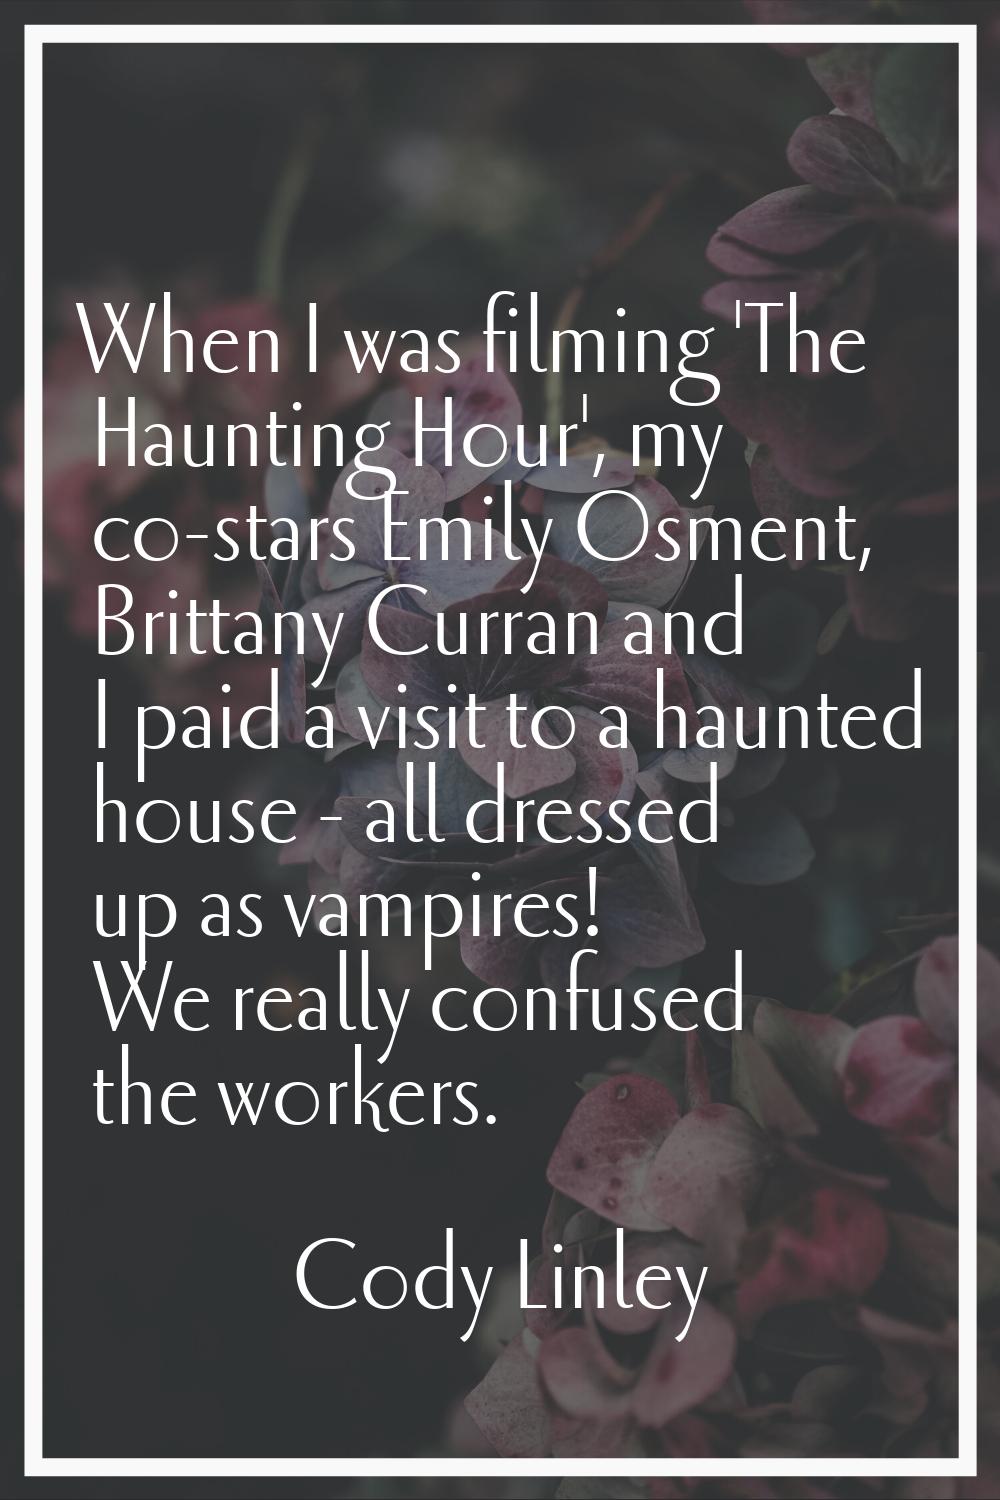 When I was filming 'The Haunting Hour', my co-stars Emily Osment, Brittany Curran and I paid a visi